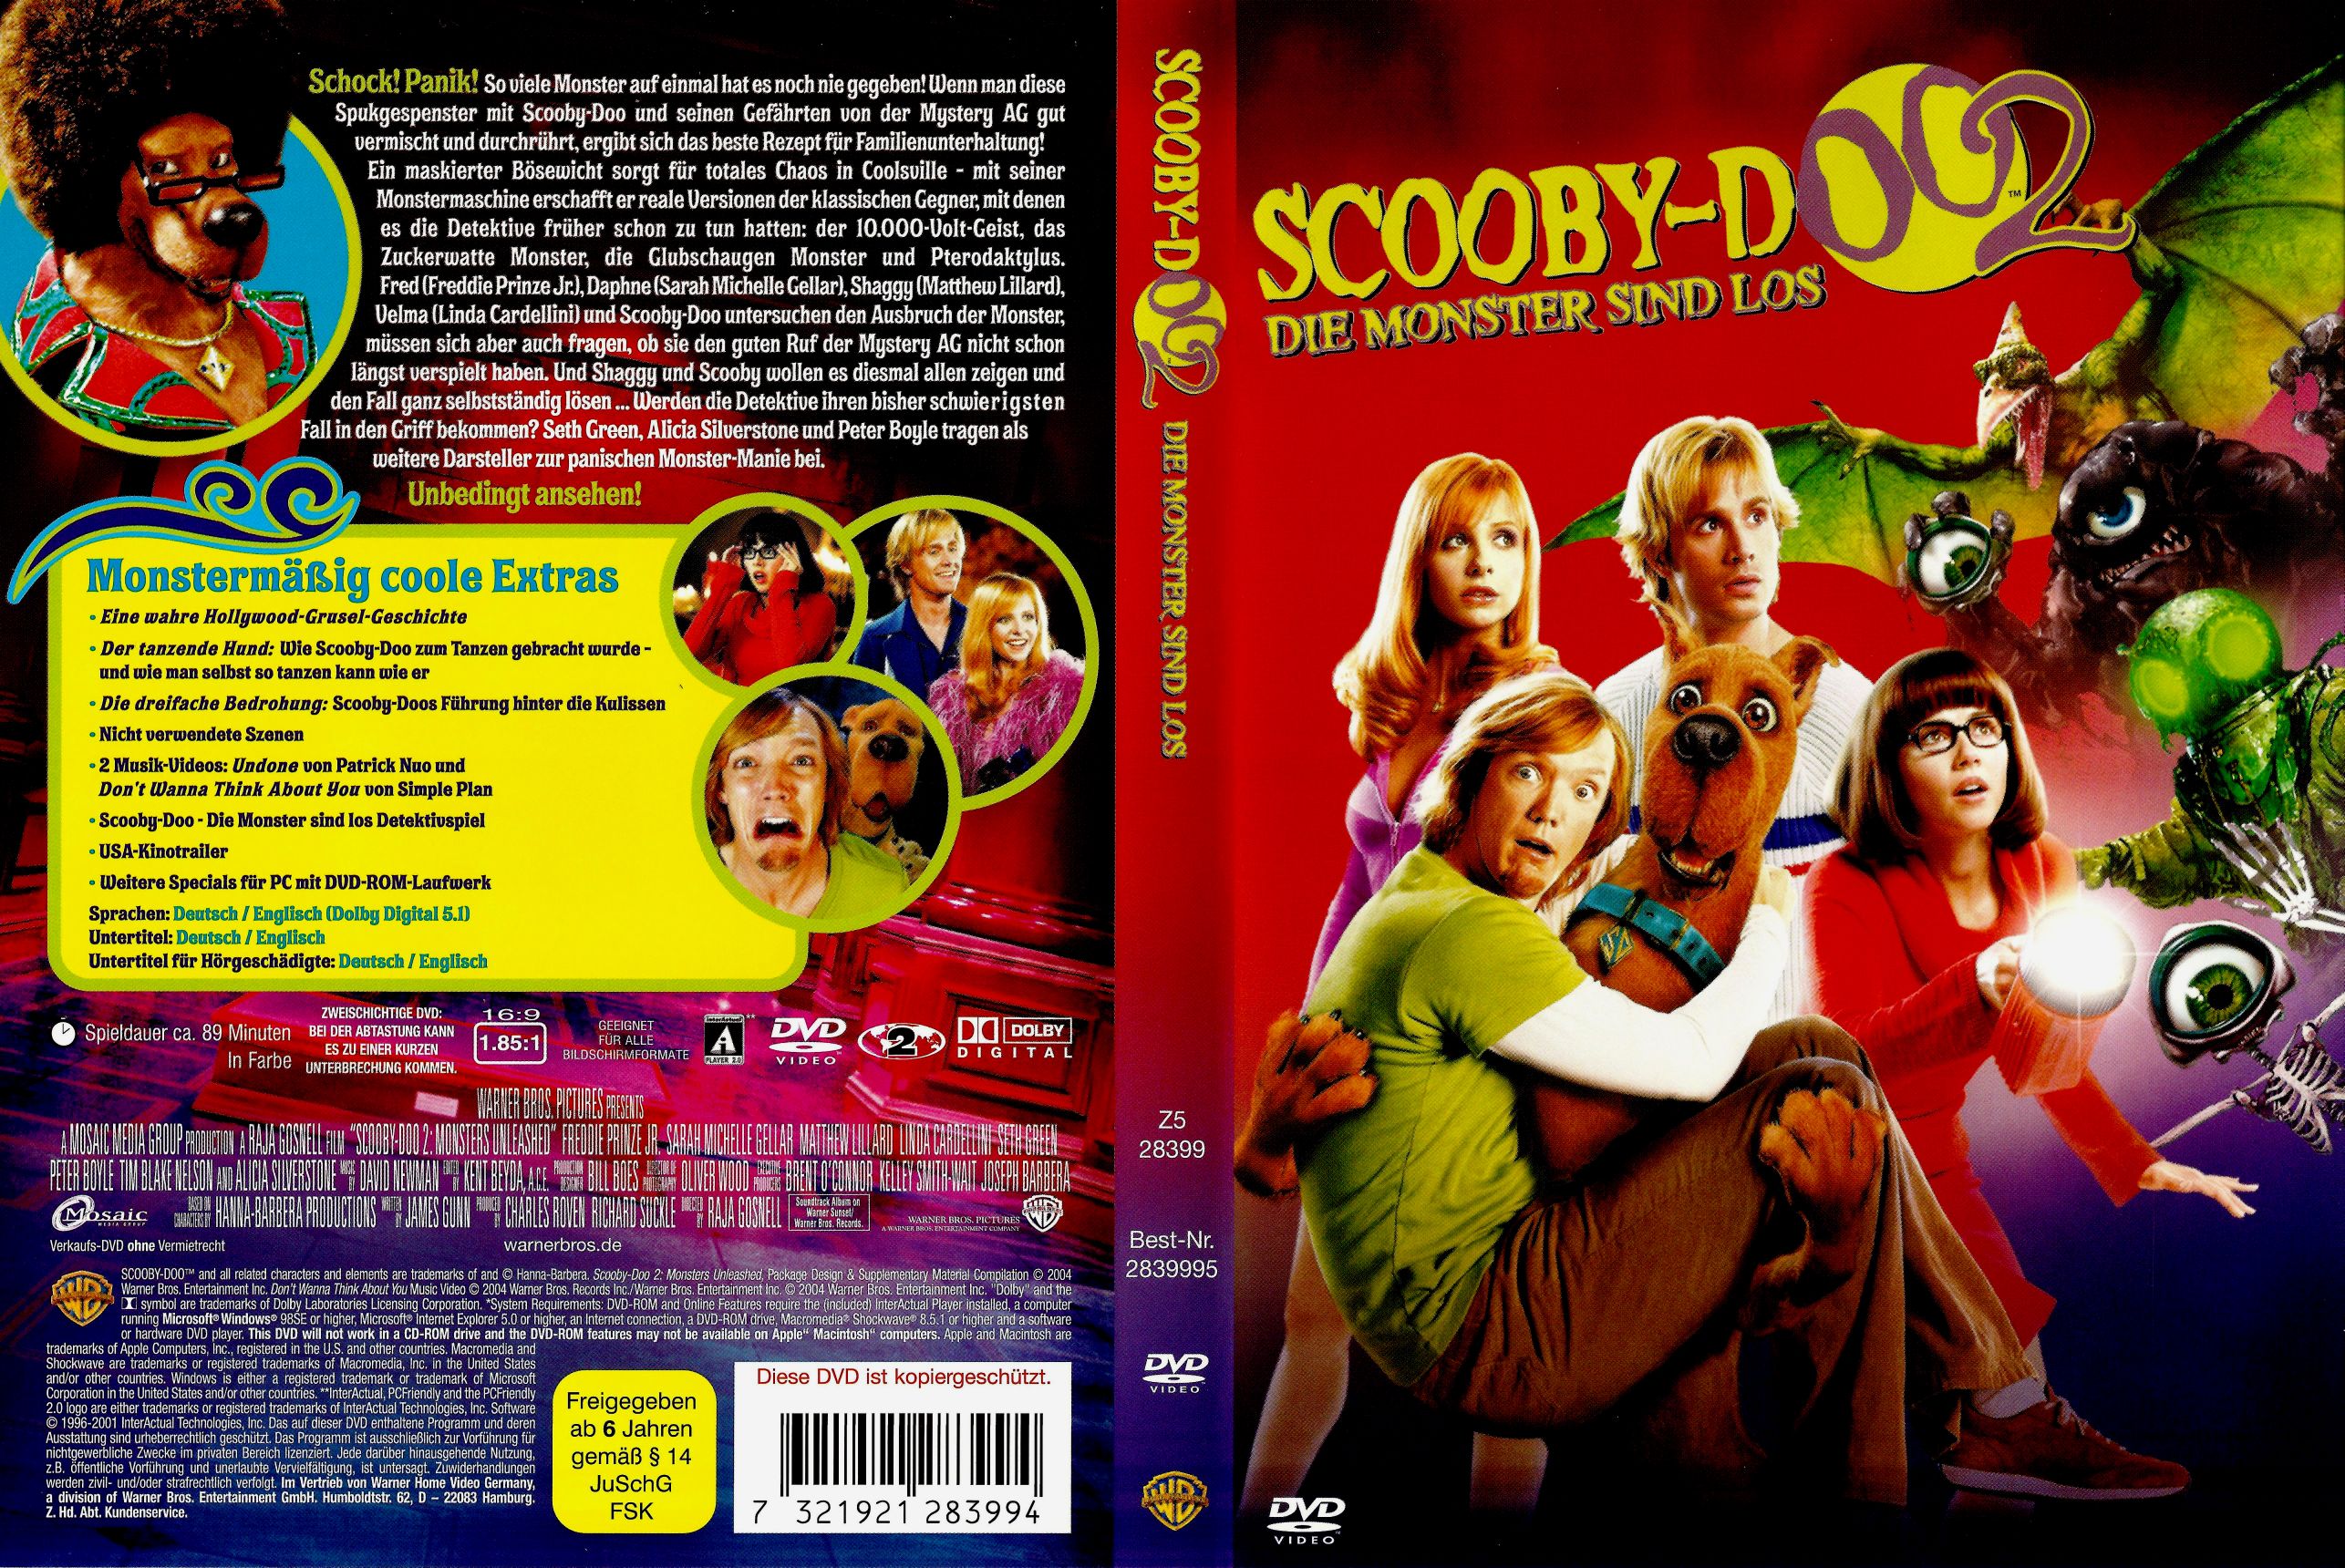  scooby  doo  2 version 1 DVD  Covers  Cover  Century Over 